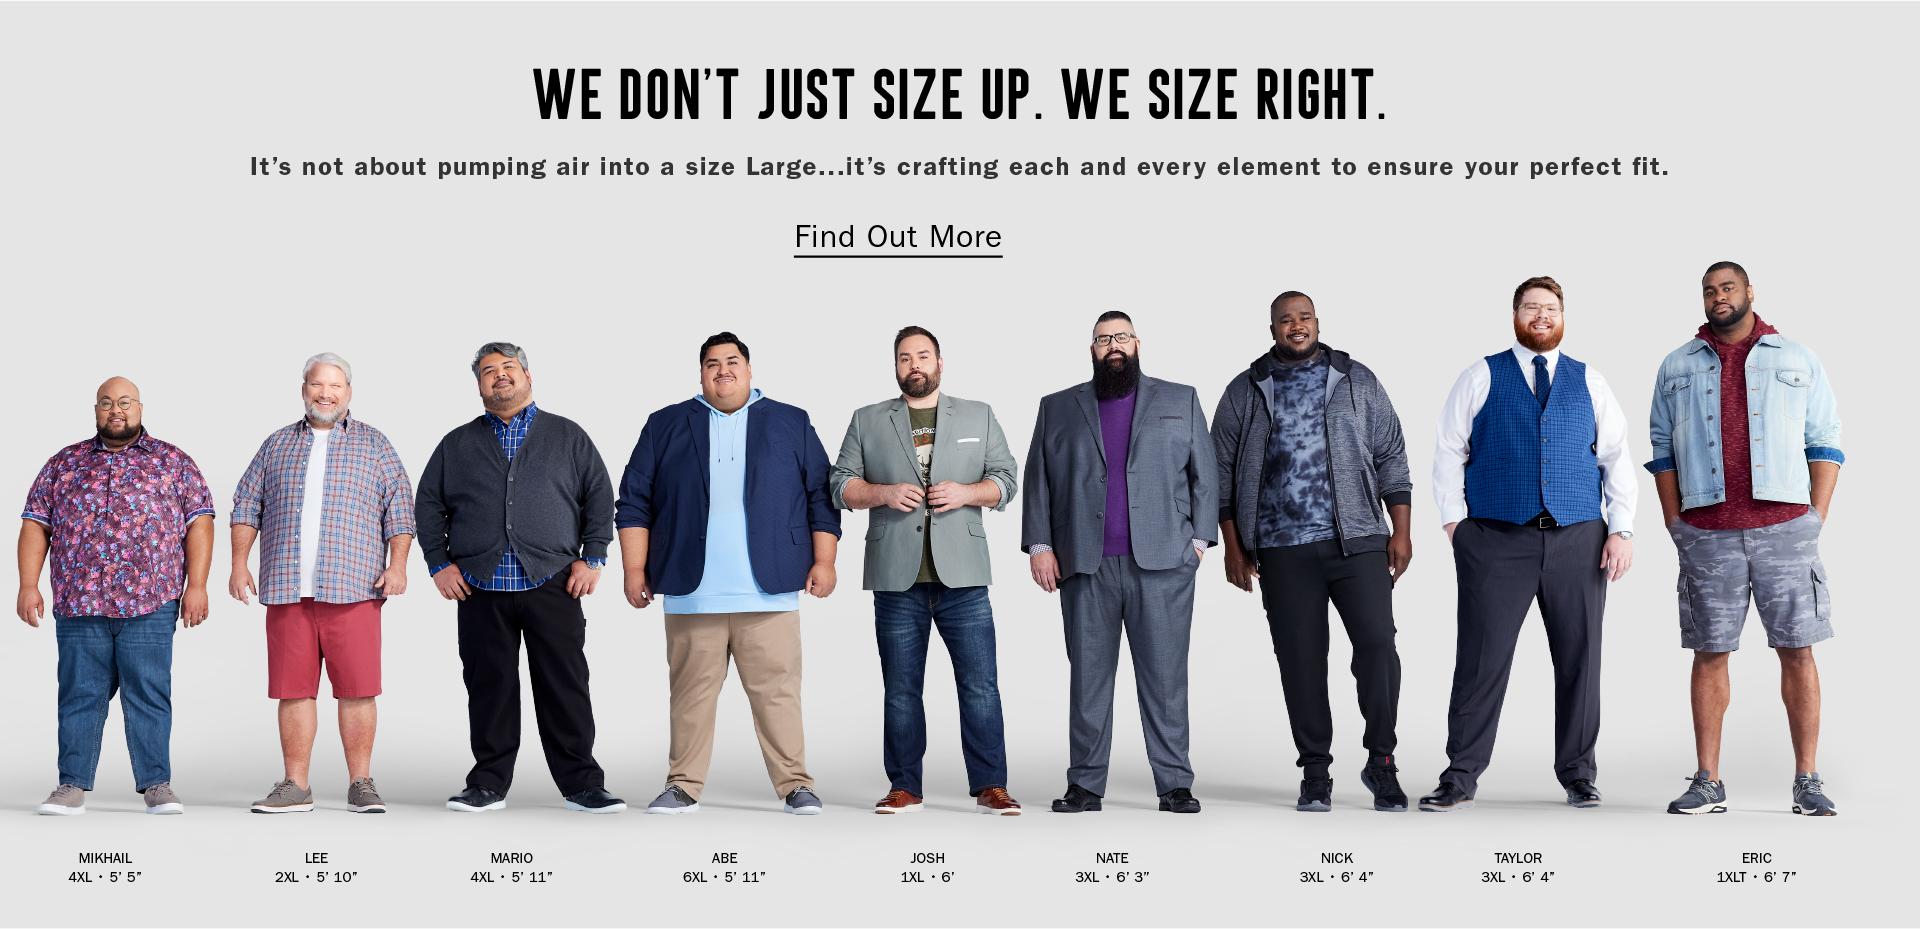 WE DON’T JUST SIZE UP. WE SIZE RIGHT. | It’s not about pumping air into a size Large...it’s crafting each and every element to ensure your perfect fit. | Find Out More